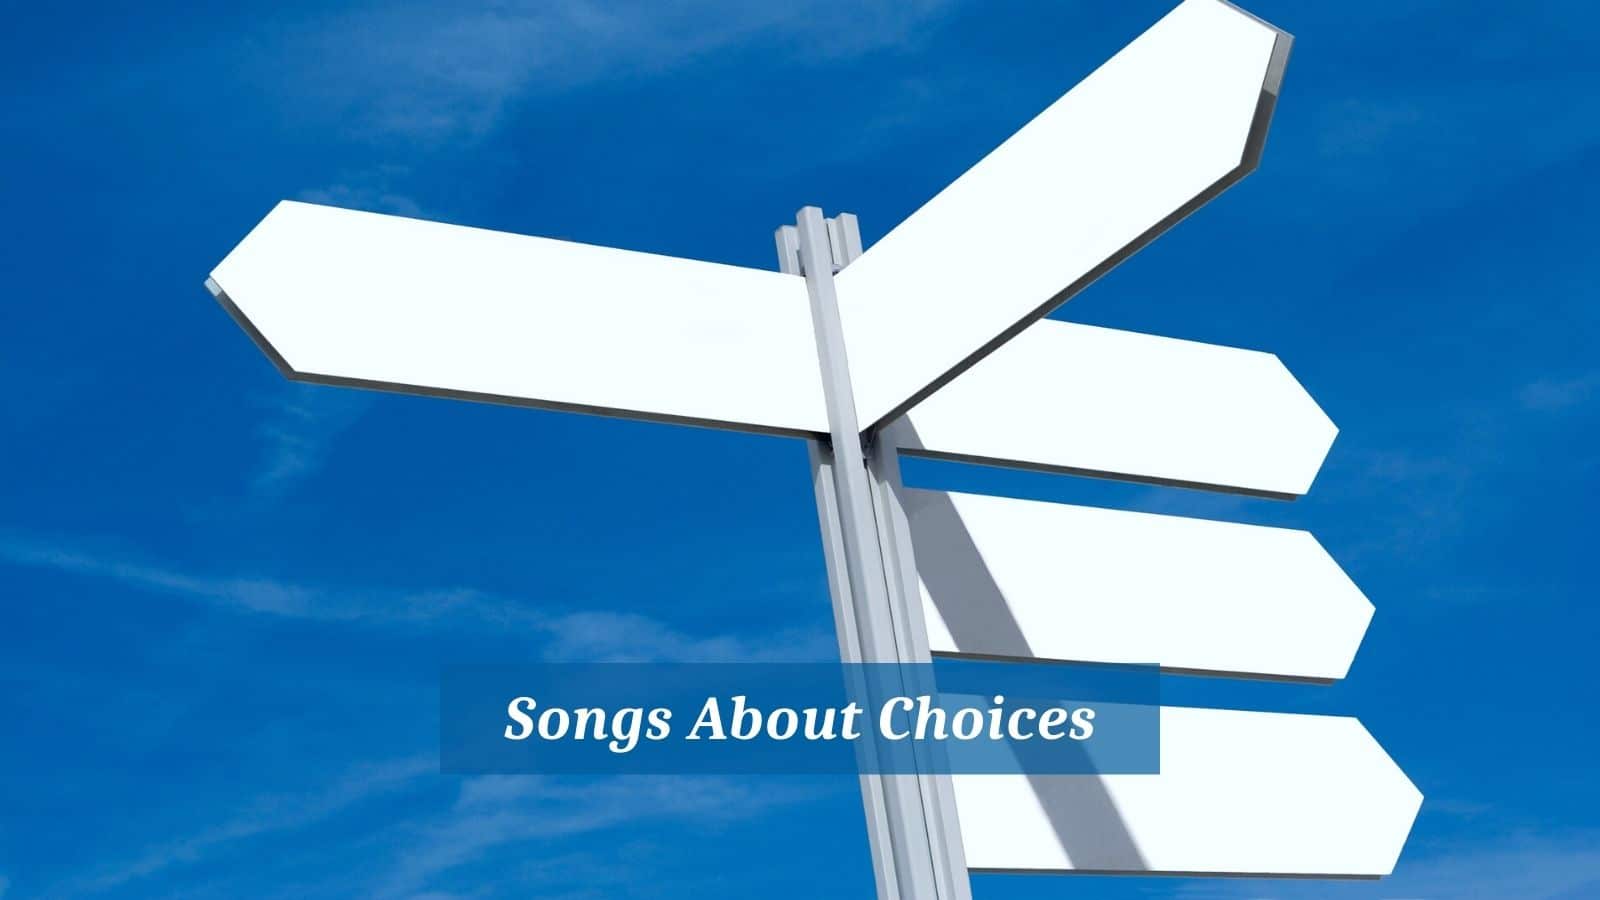 Songs About Choices